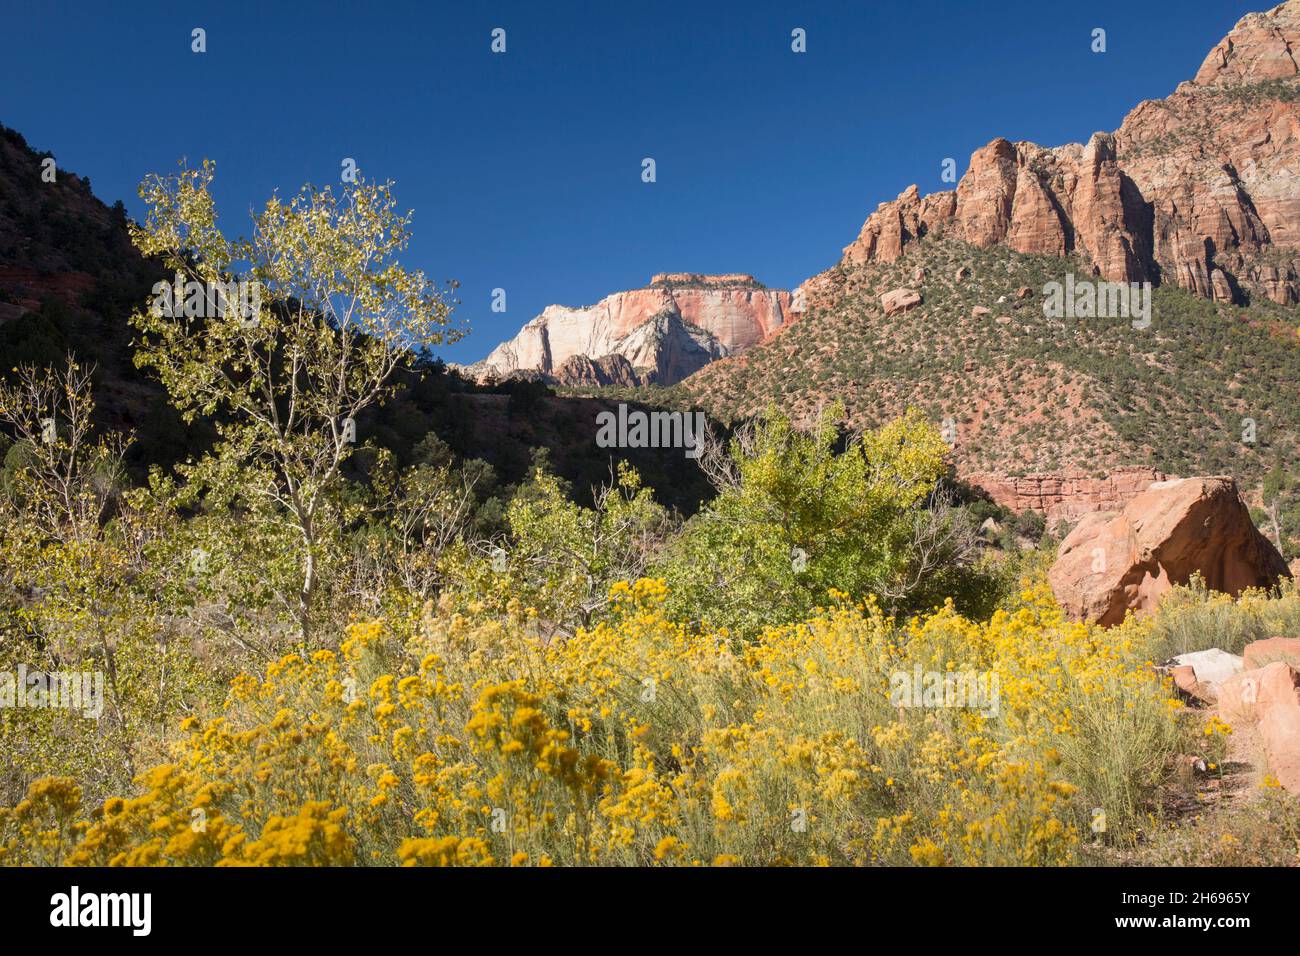 Zion National Park, Utah, USA. View to the West Temple from hillside above Pine Creek, autumn, colourful desert brush in foreground. Stock Photo